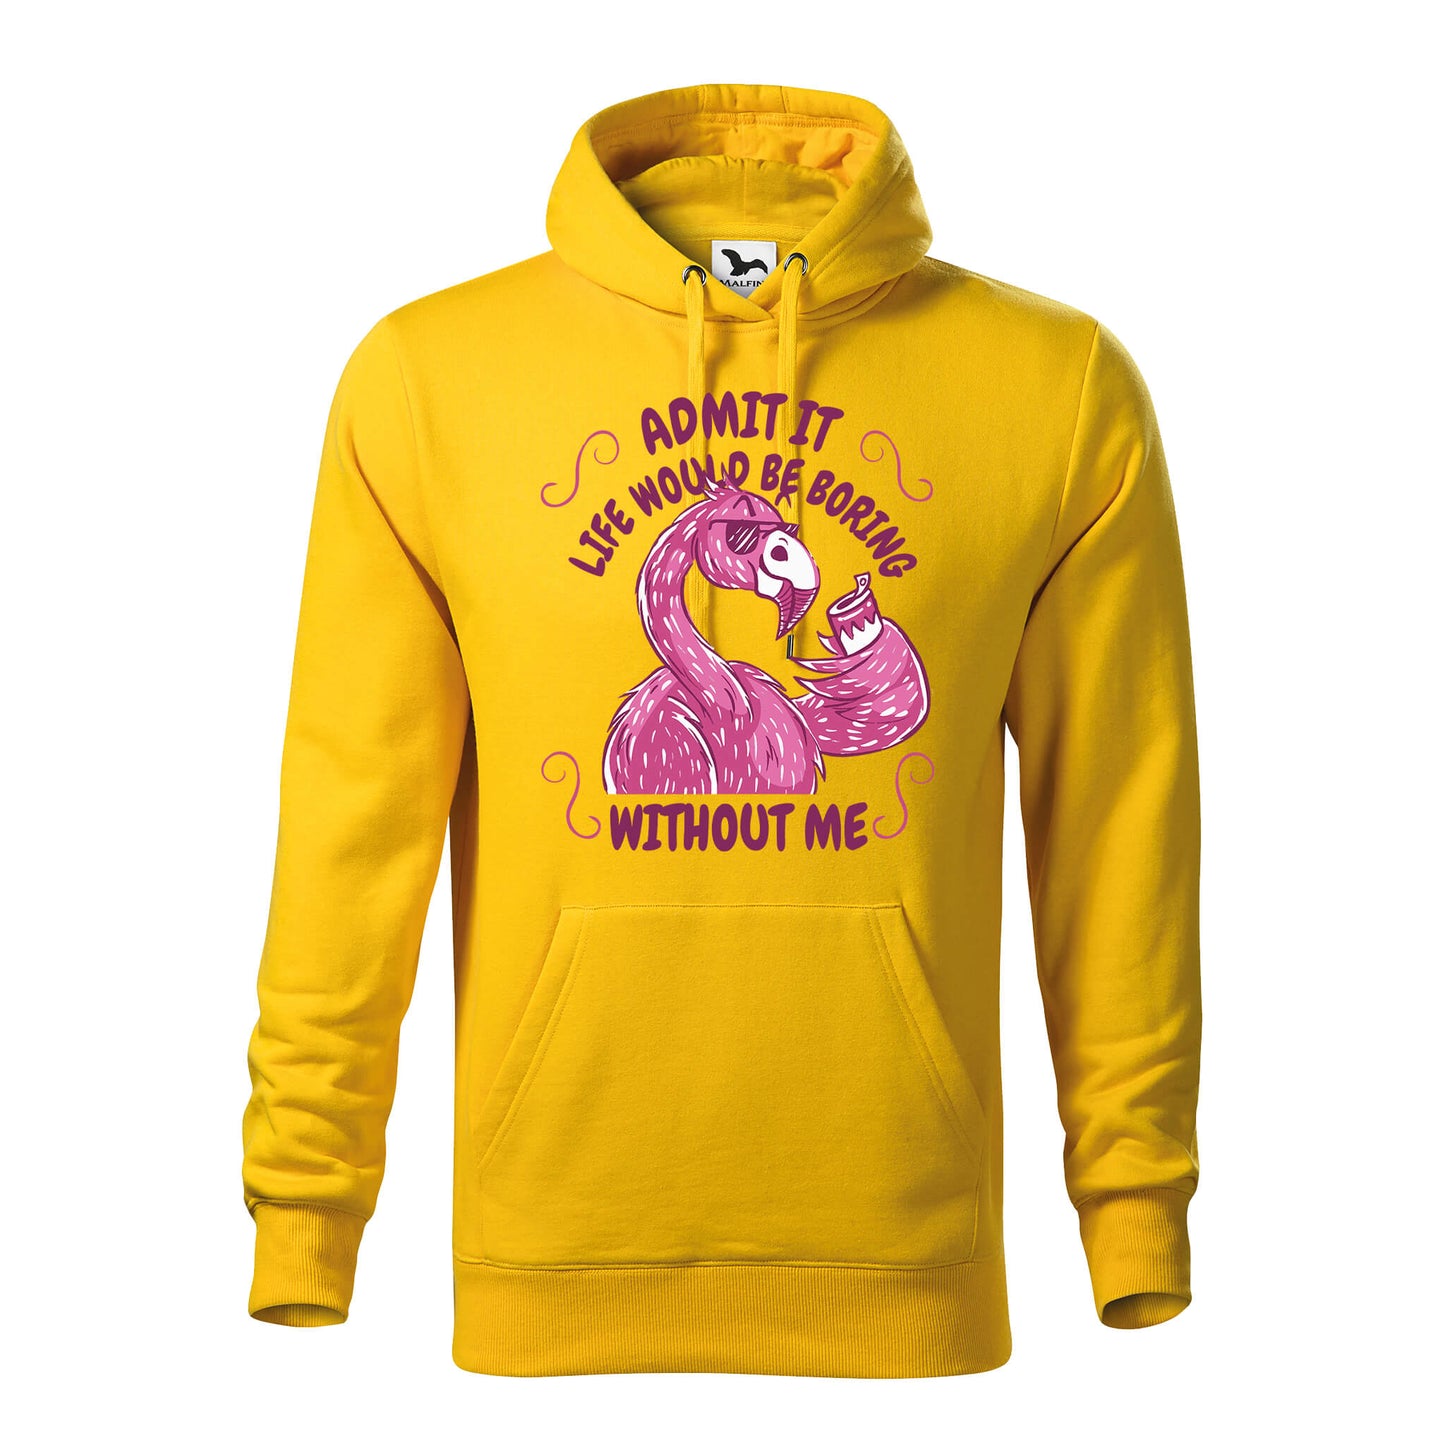 Life would be boring without me hoodie - rvdesignprint